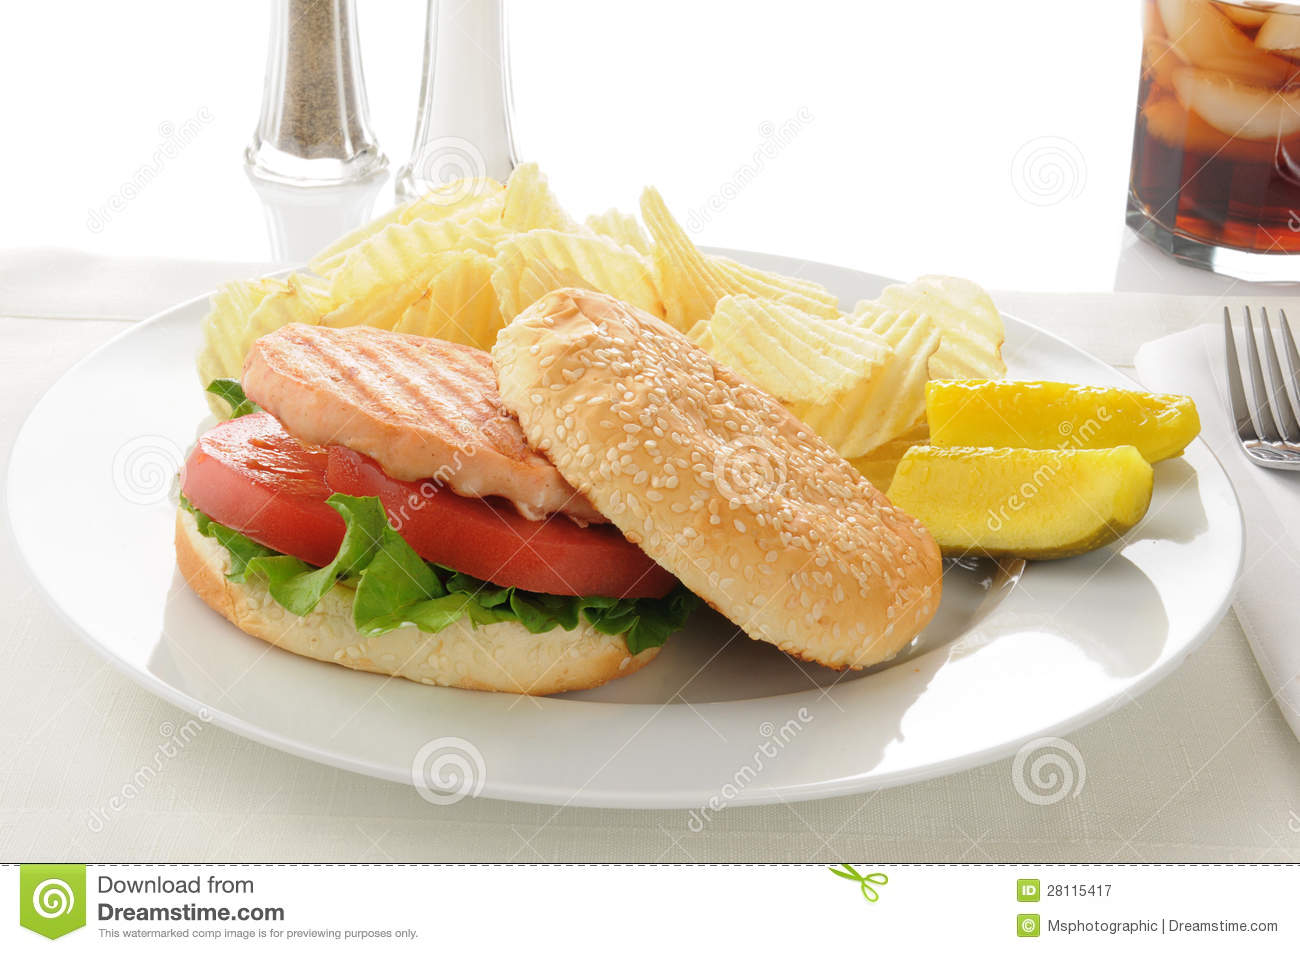 Salmon Burger With Chips Royalty Free Stock Photography   Image    